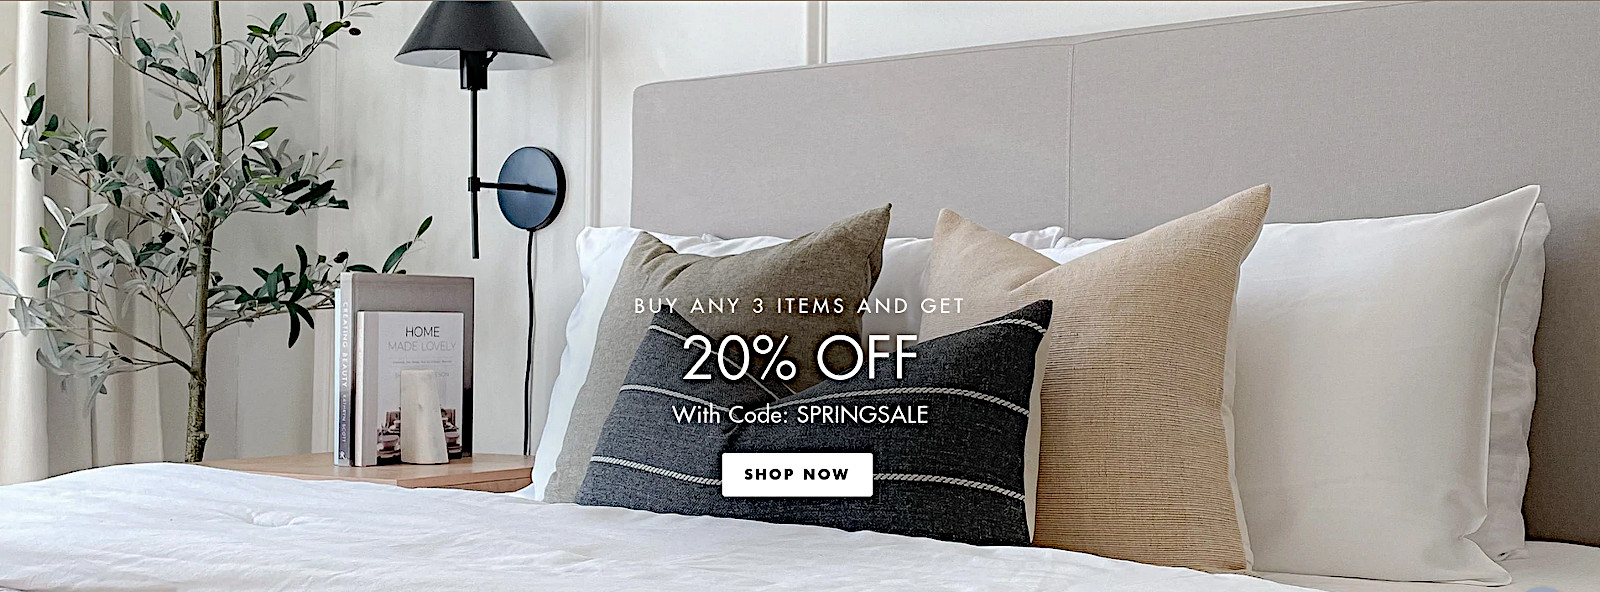 bamboo bedding special discount